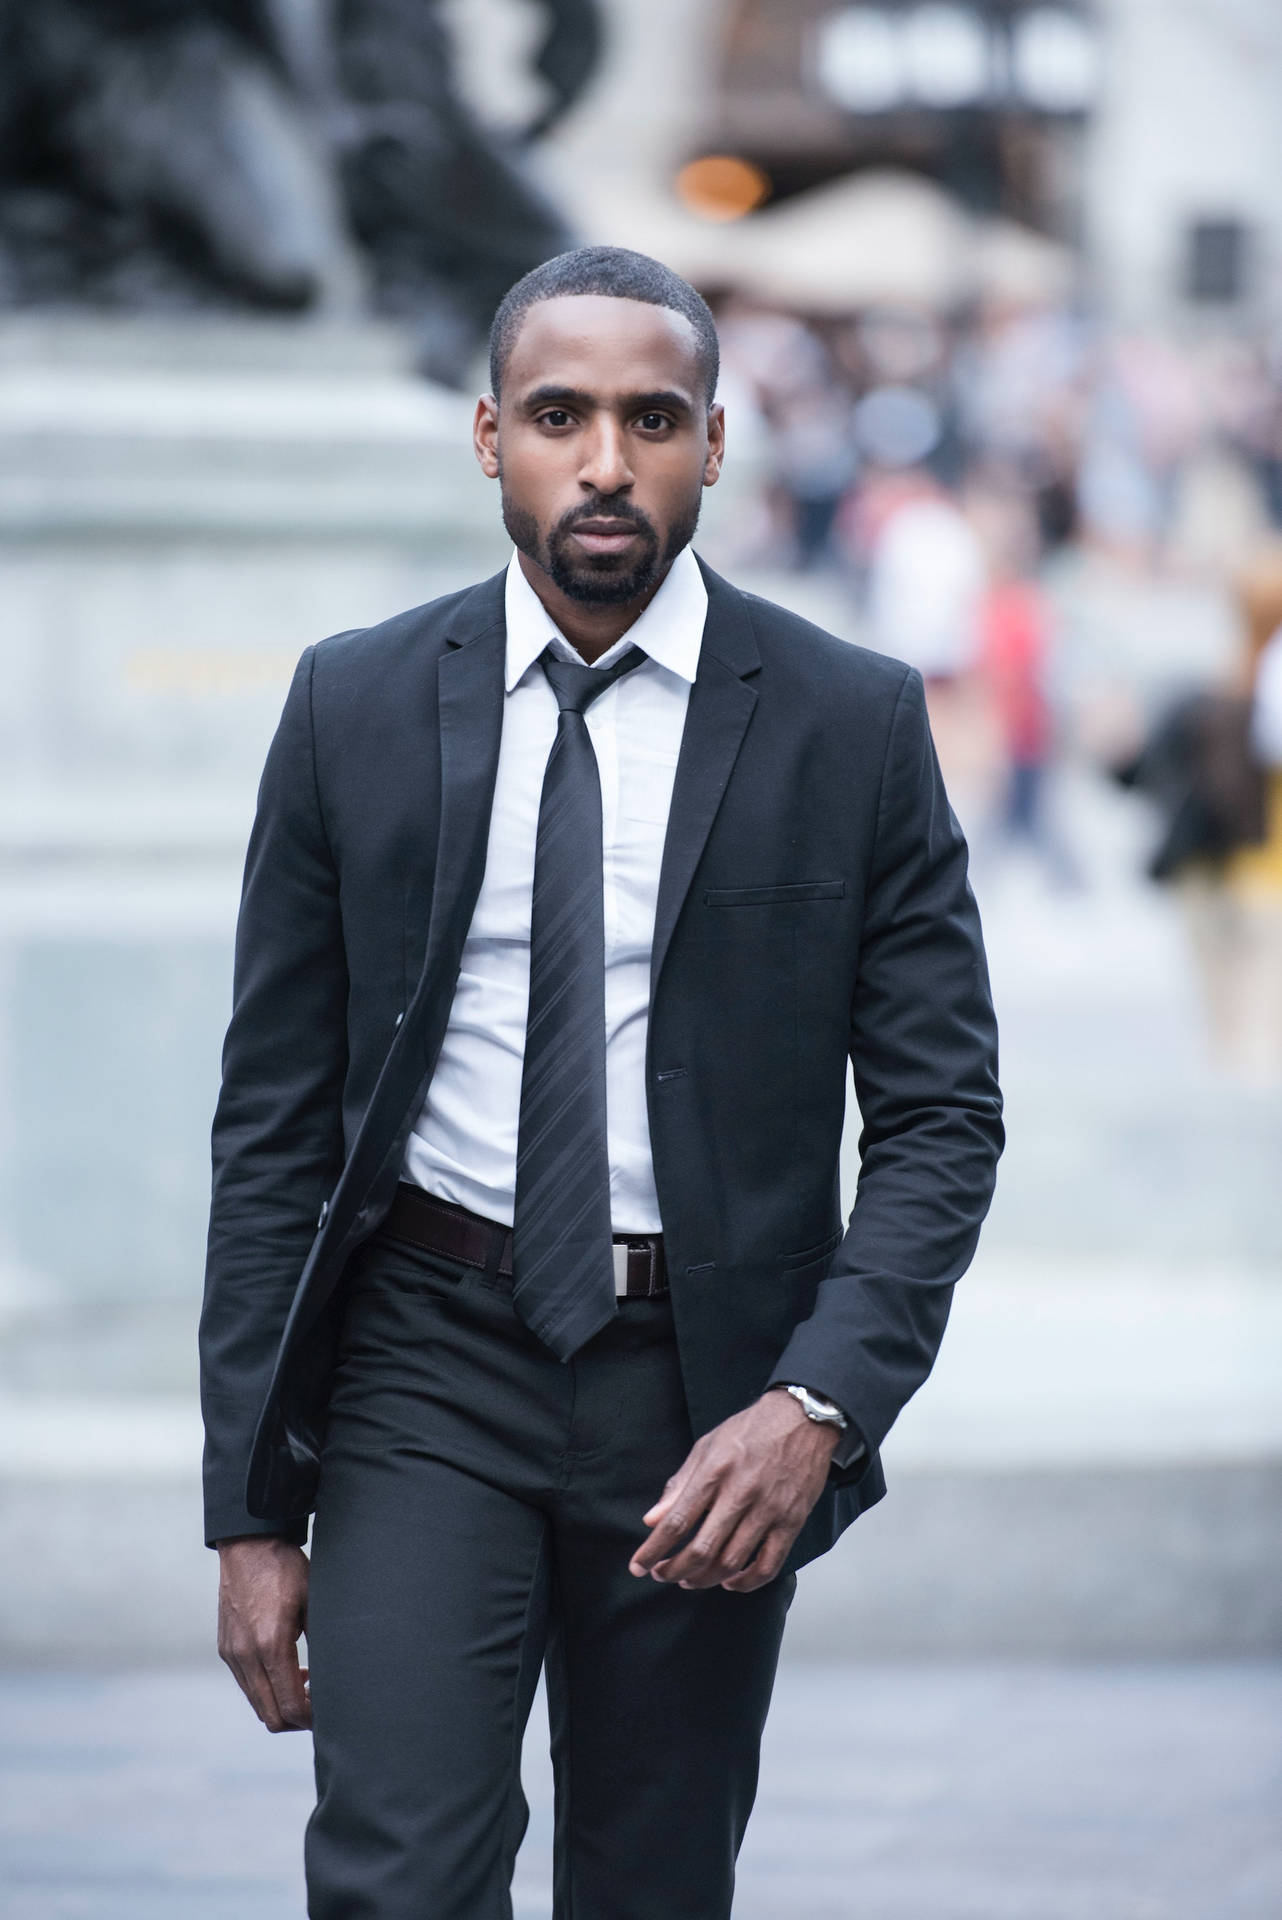 Black Man In A Business Suit Picture